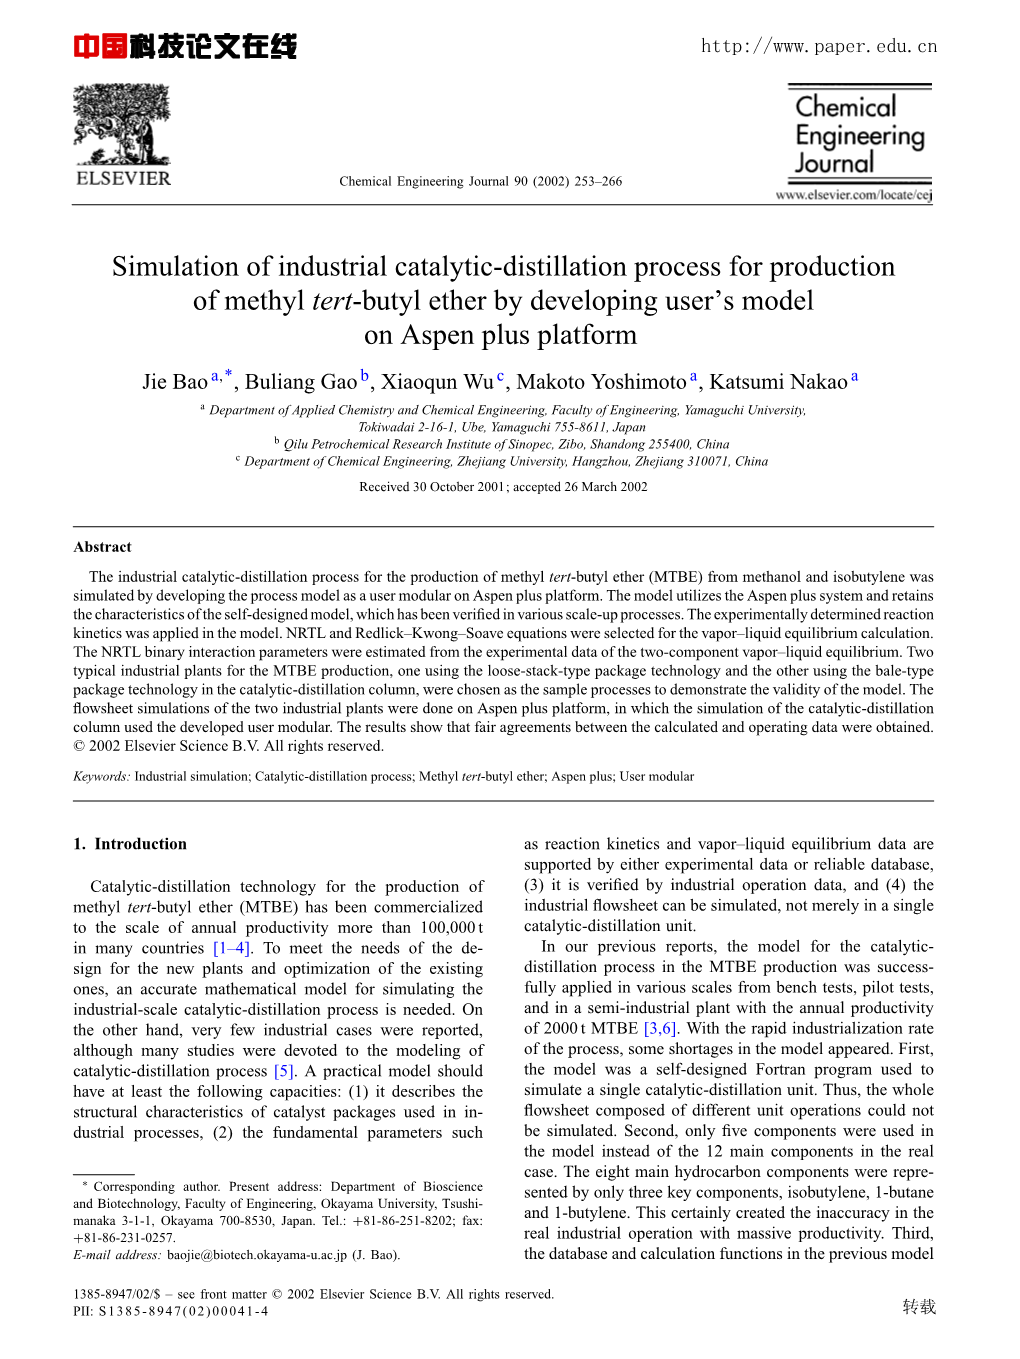 Simulation of Industrial Catalytic-Distillation Process For